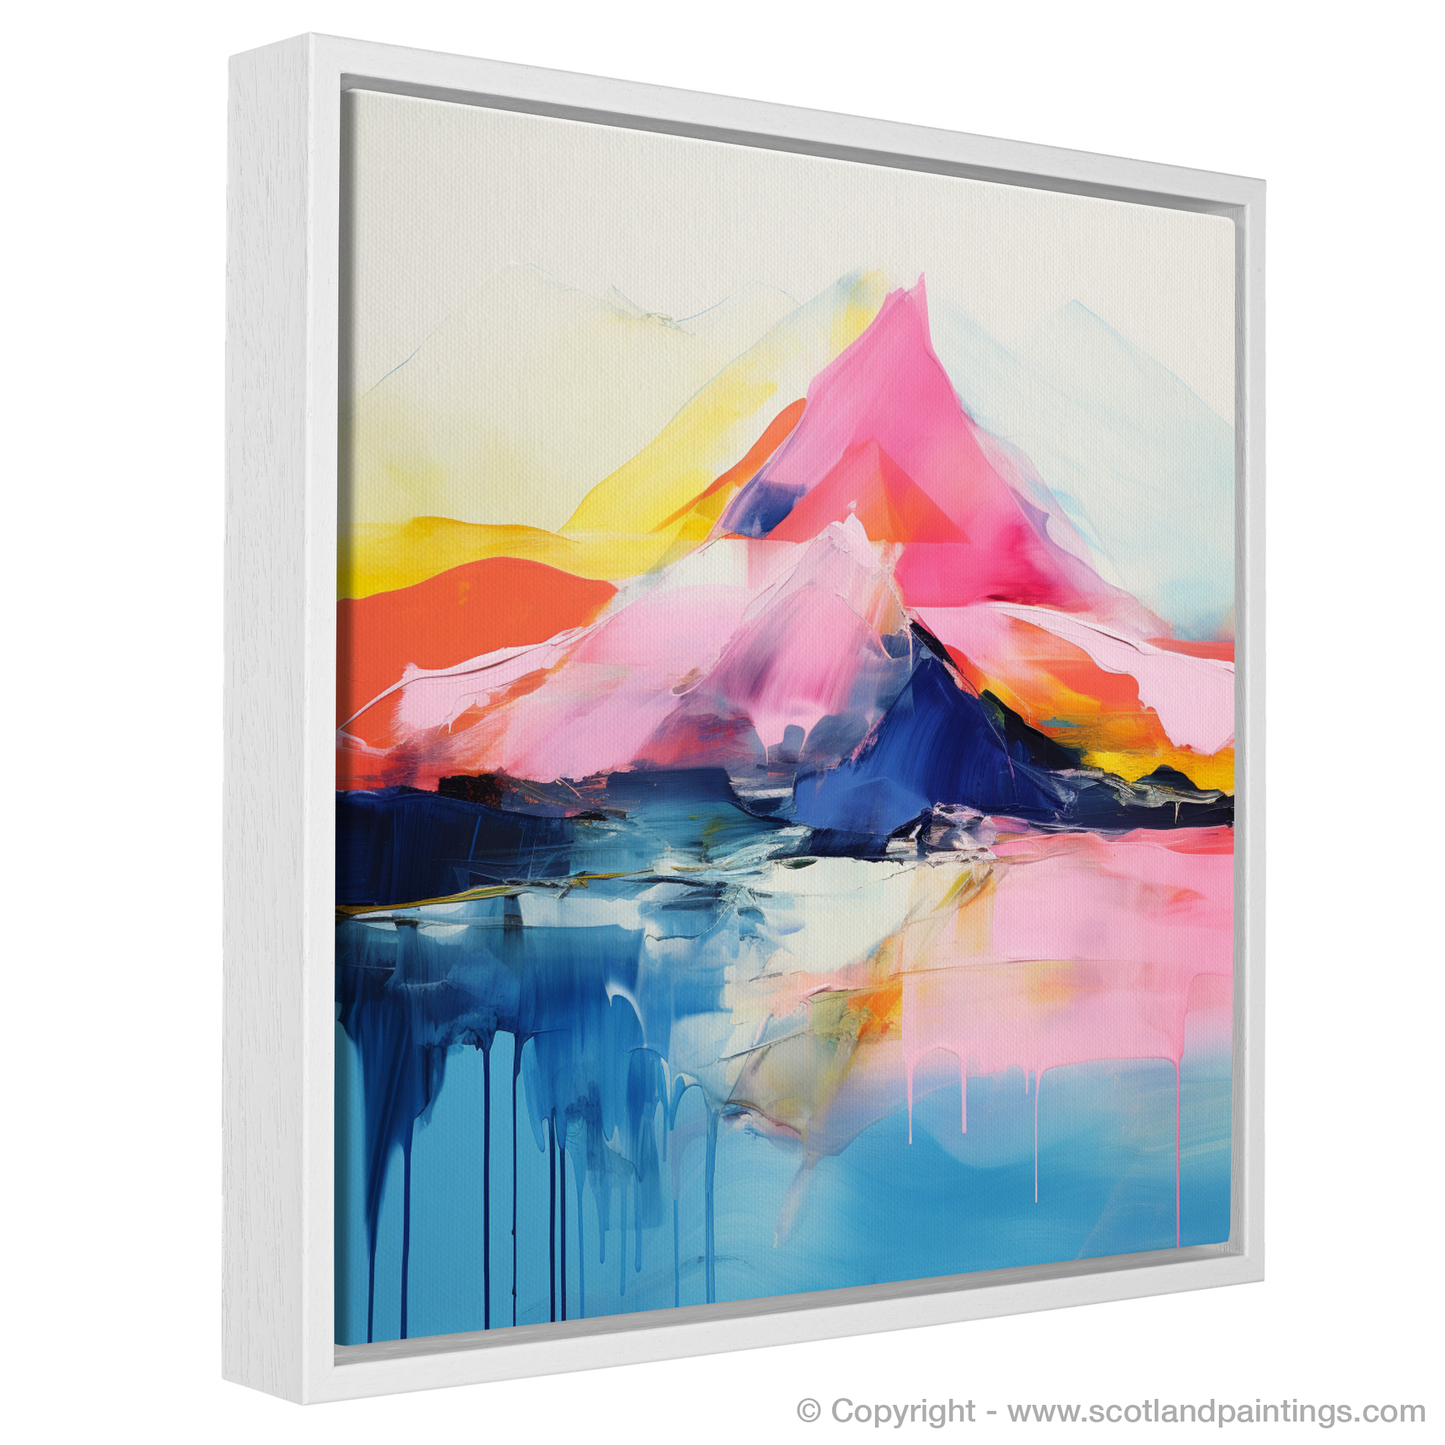 Painting and Art Print of Schiehallion entitled "Schiehallion Reverie: Abstract Ode to the Scottish Highlands".